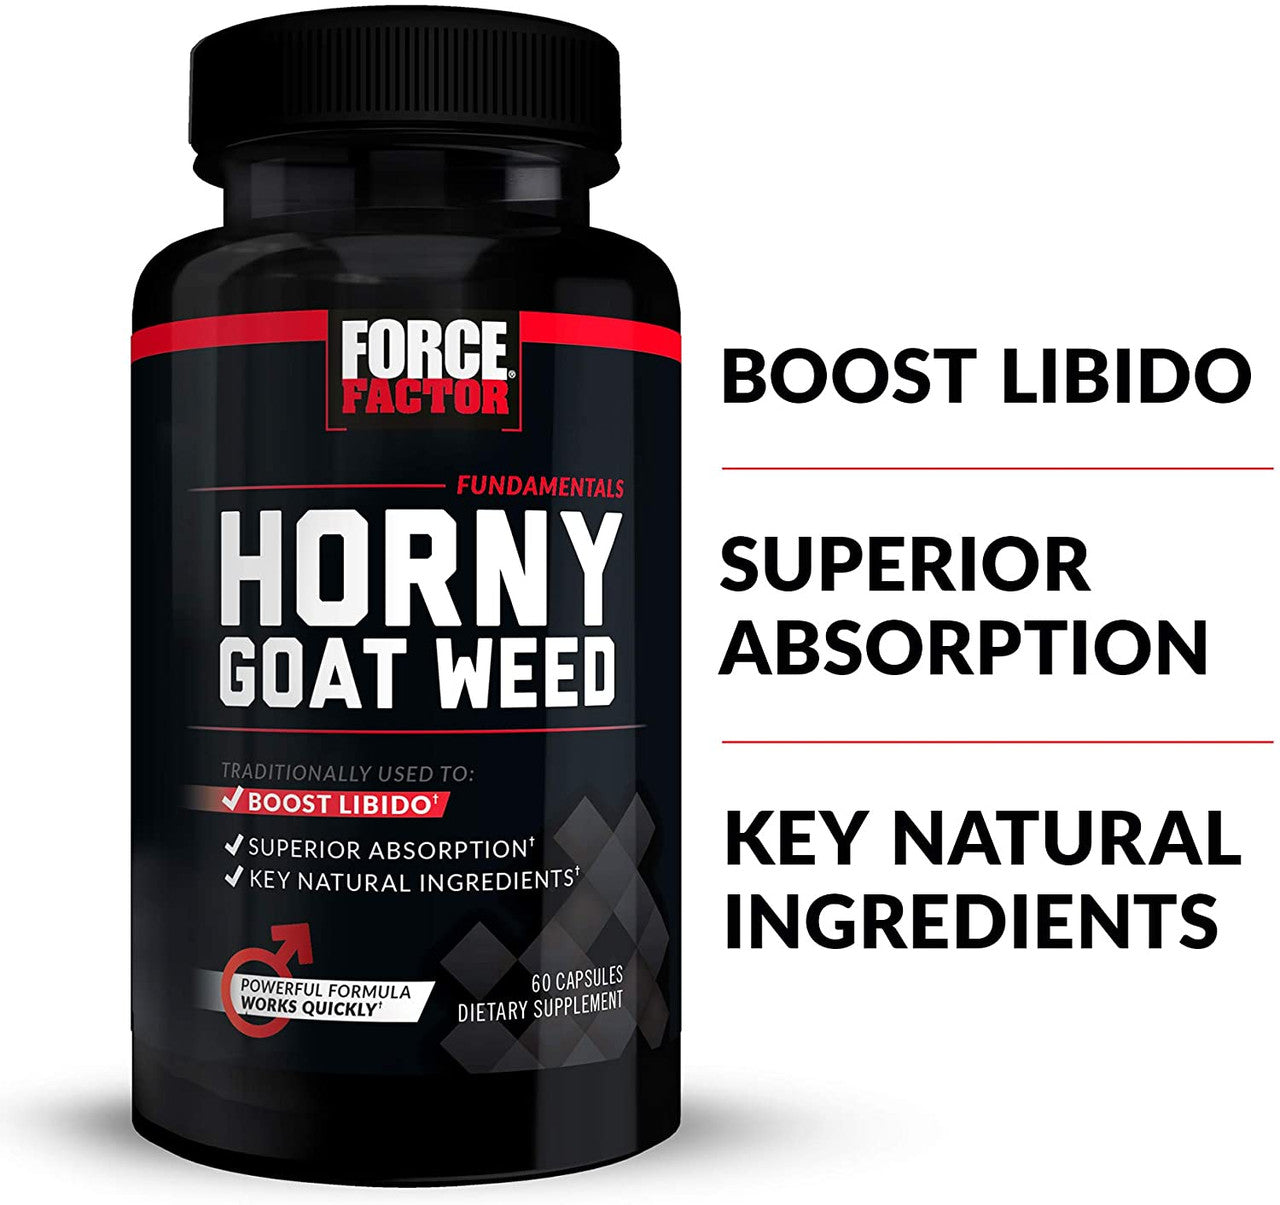 Force Factor Horny Goat Weed usages